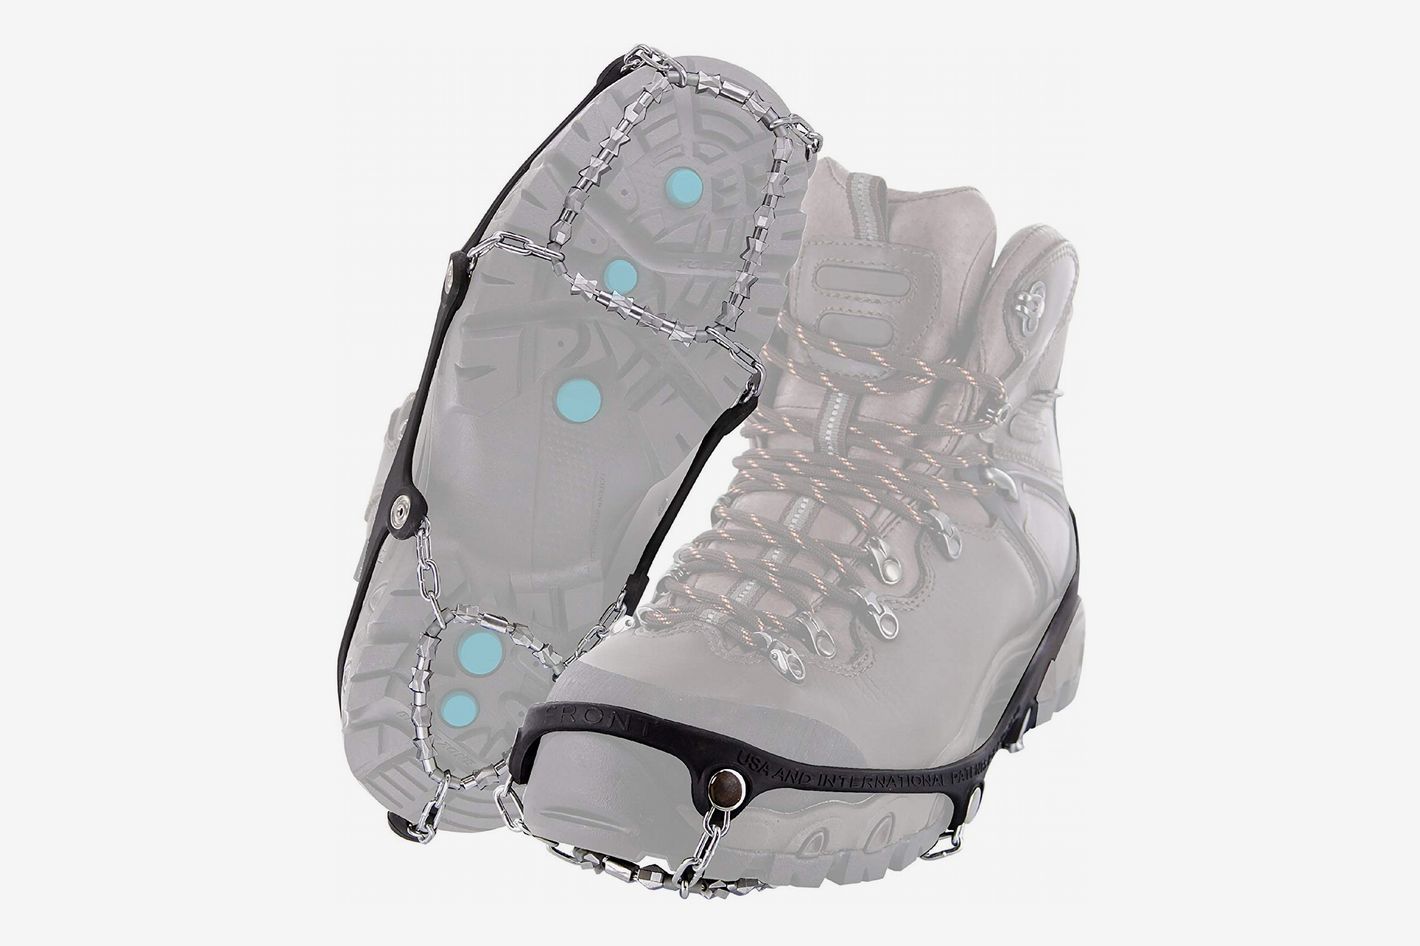 Men-UK: 3-14, Women-UK: 3-16 Durable Anti-slip Snow Cleats Traction Alloy Ice Grippers for Hiking EUR 31-48 Walking Jogging Ice Snow Grips Anti Slip Winter Ice Grippers Snow Traction Cleats Crampon Spikers Ice Traction Slip on Boots Shoes Cover 